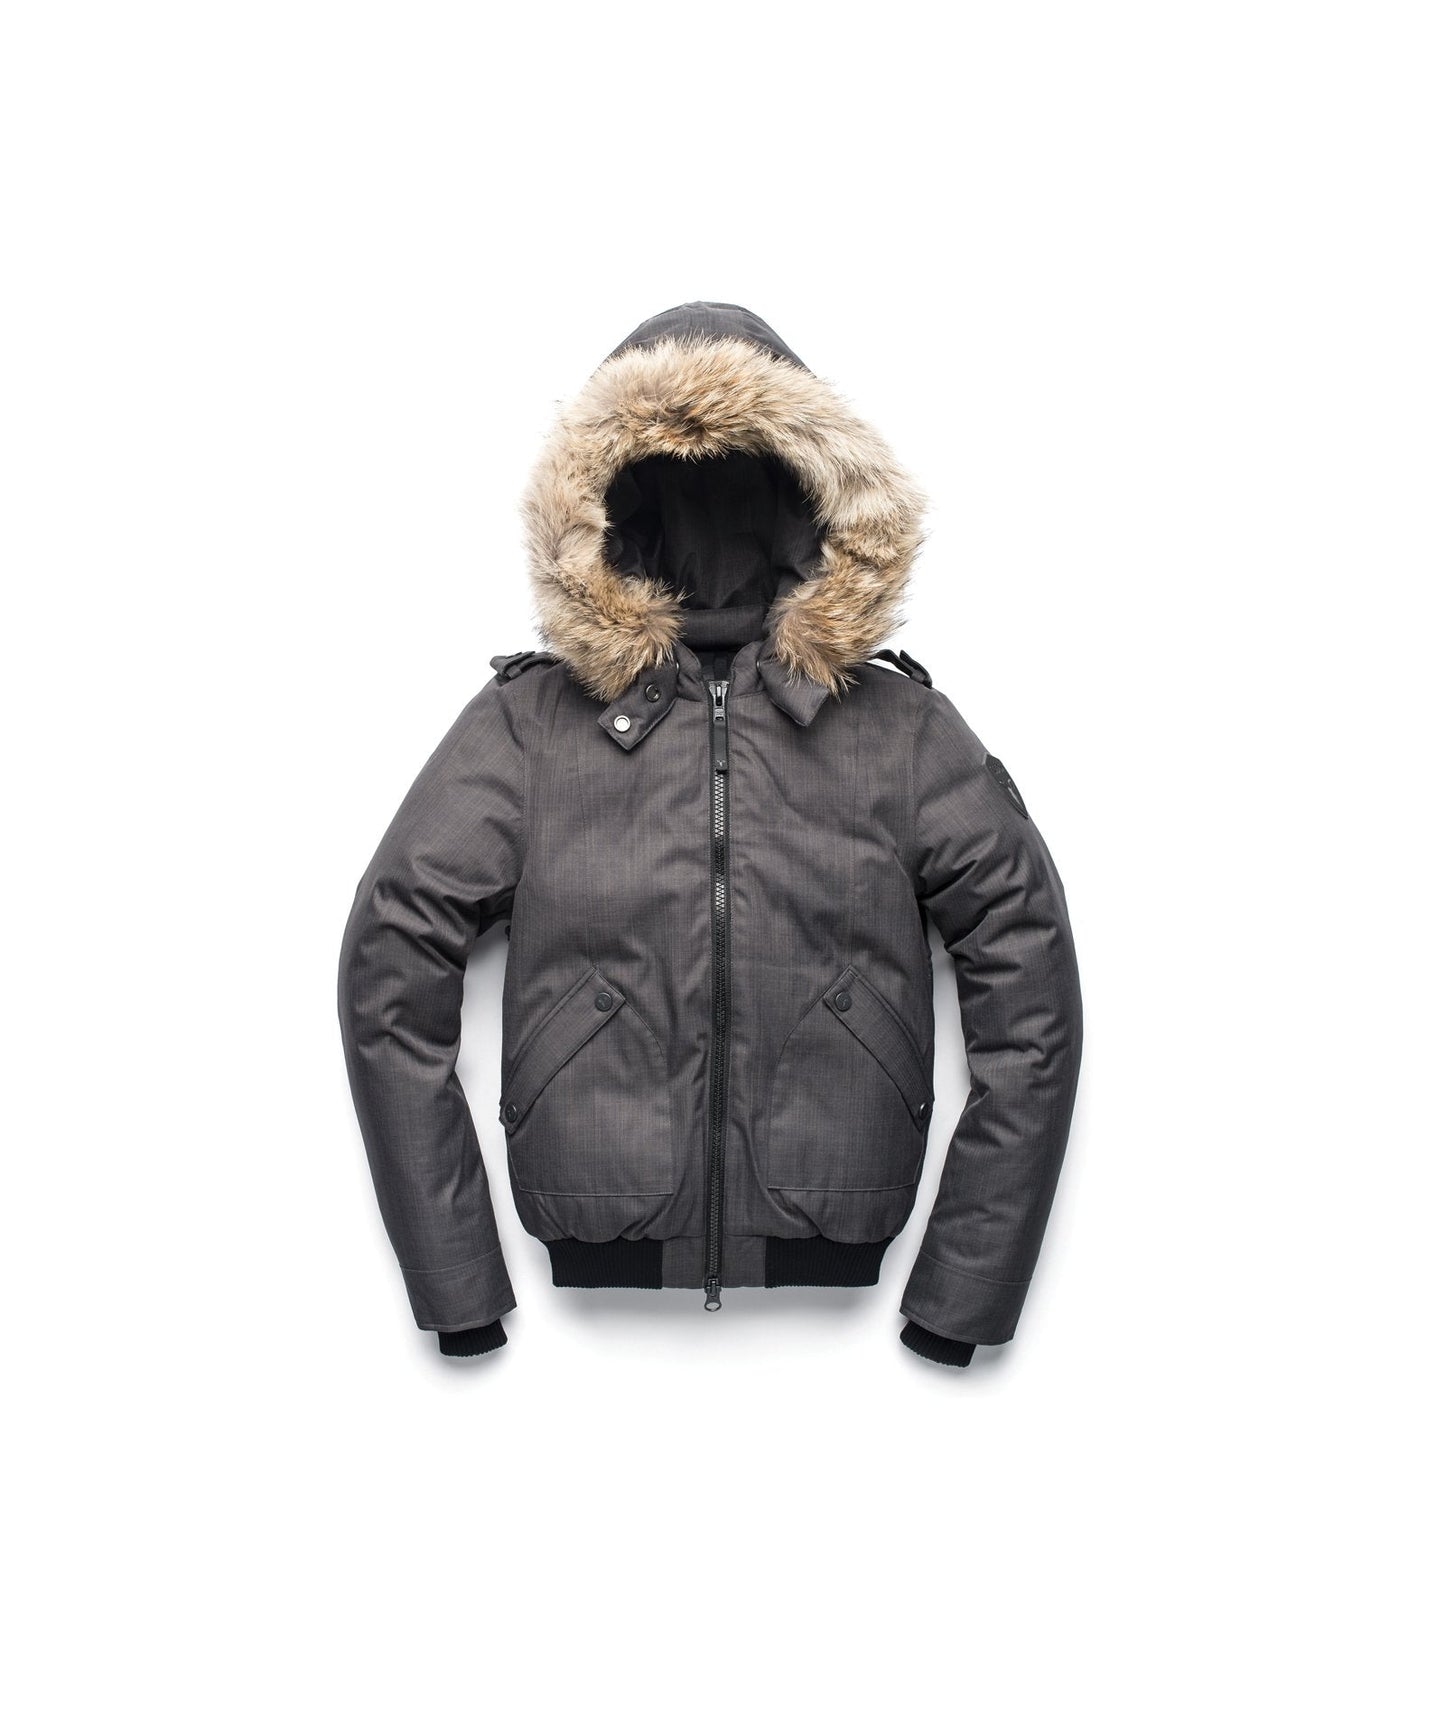 Women's bomber style down filled jacket with a removable hood and fur trim in CH Steel Grey